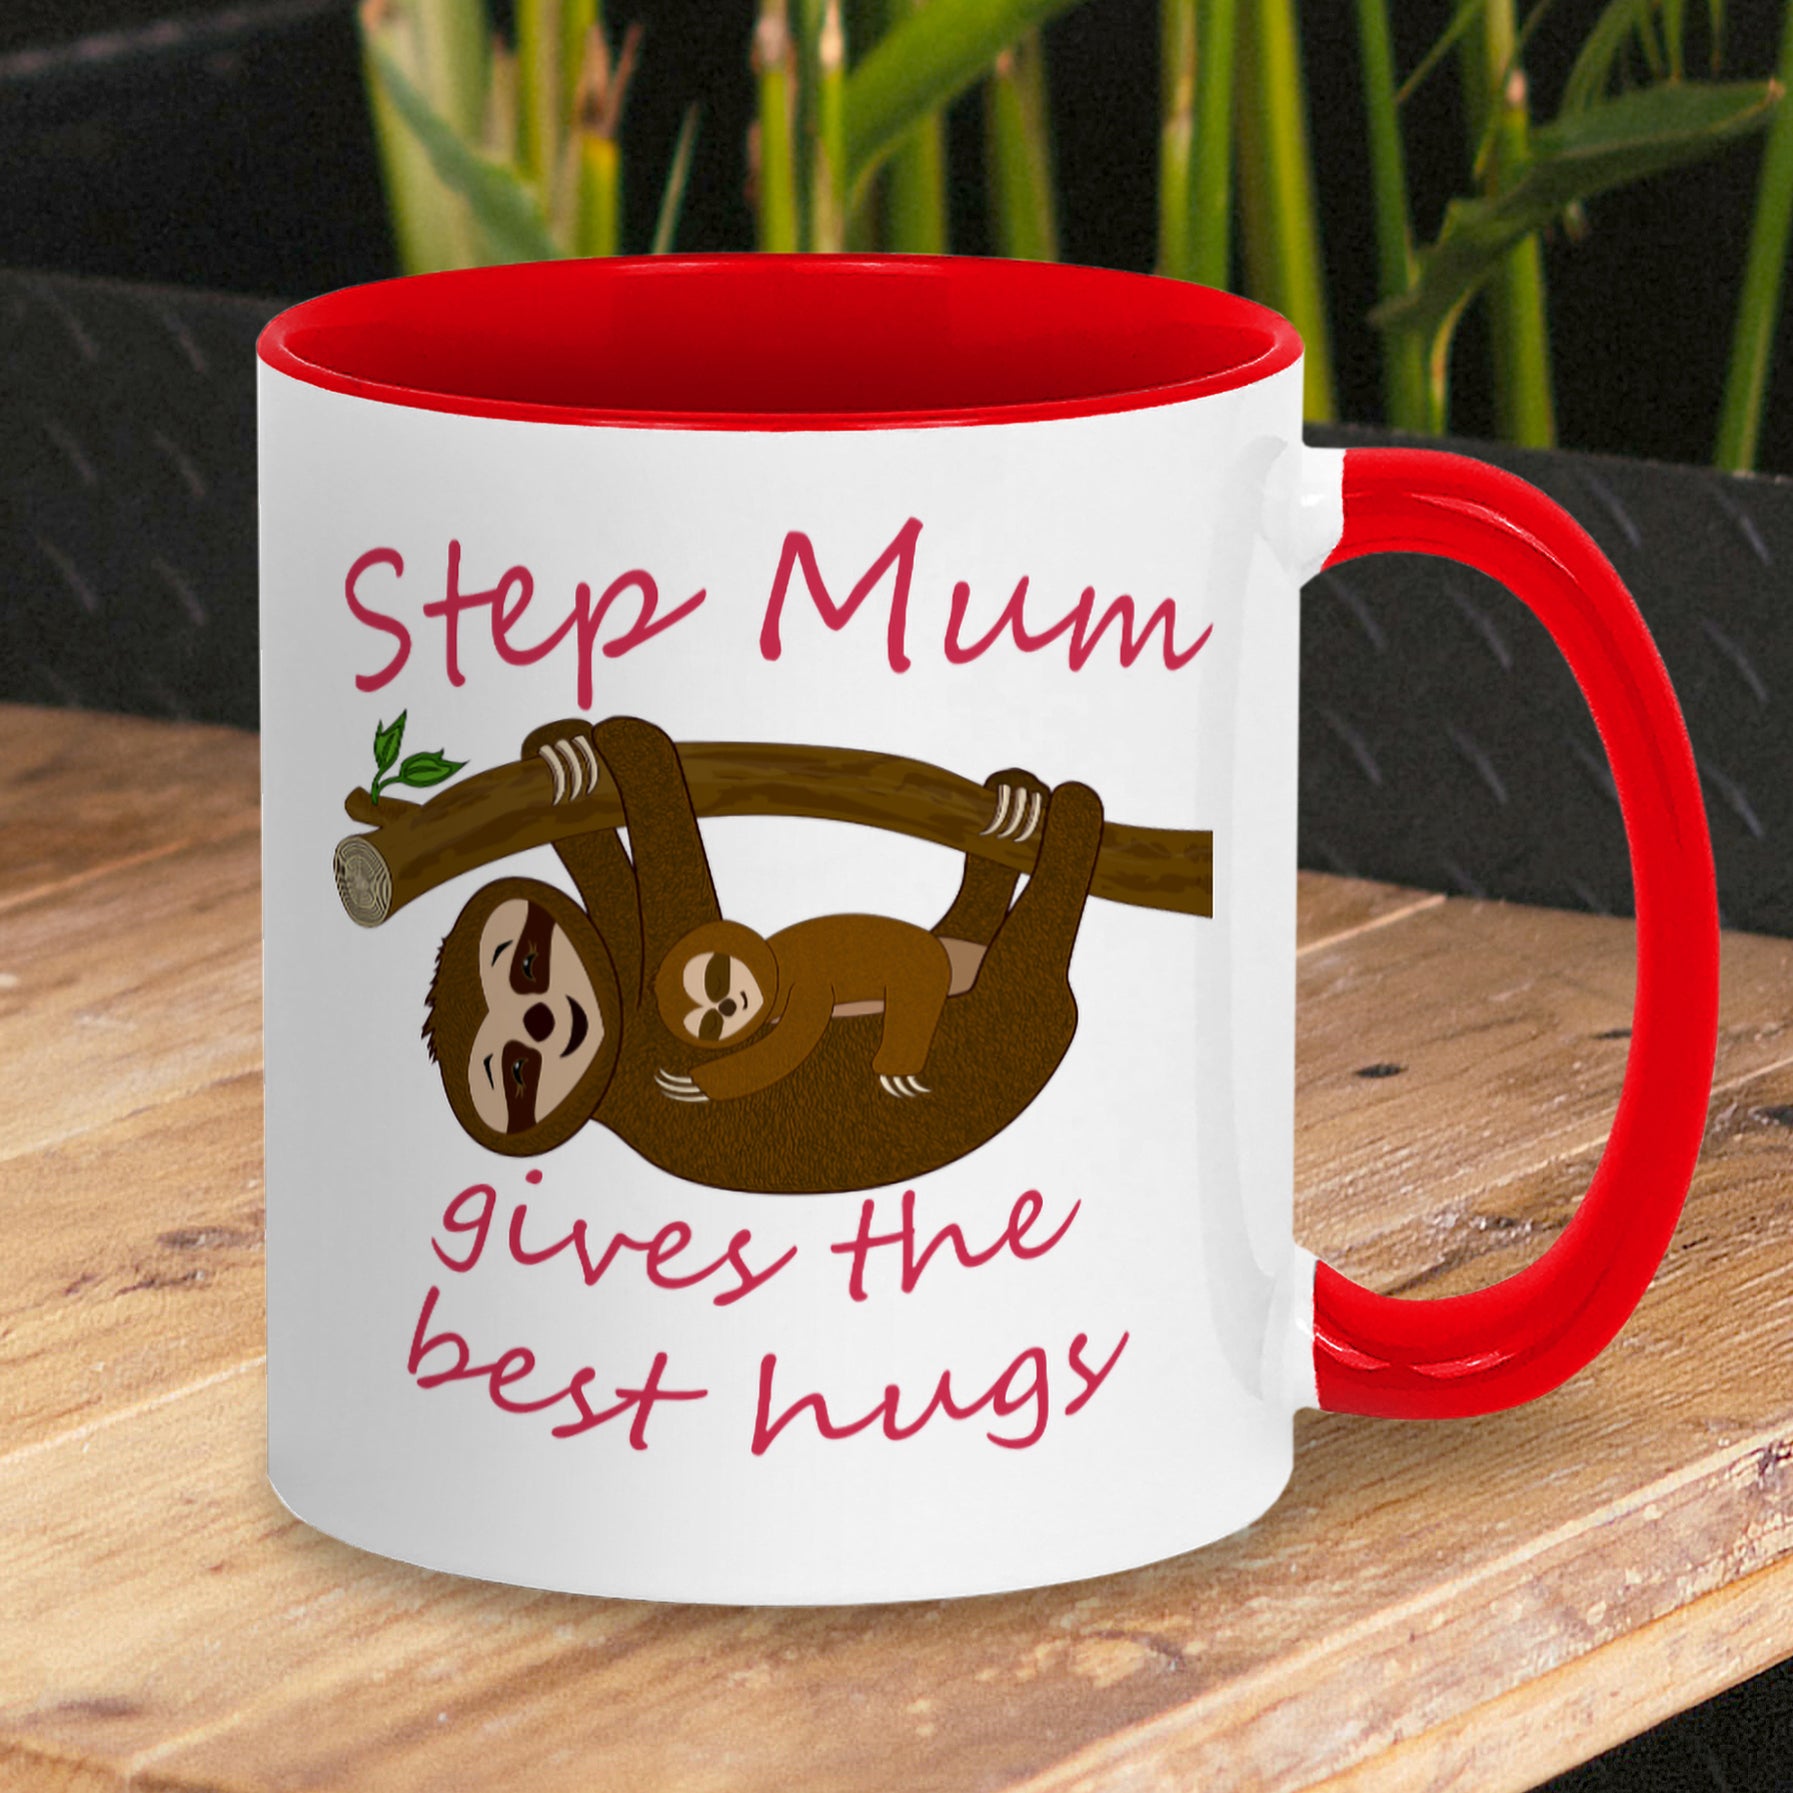 Personalised Tea / Coffee cup gift. Cute cuddly three toed sloths on a branch. Mum and baby. Two tone white with red ceramic coffee mug. Customisable name reads Step Mum gives the best hugs in red font.